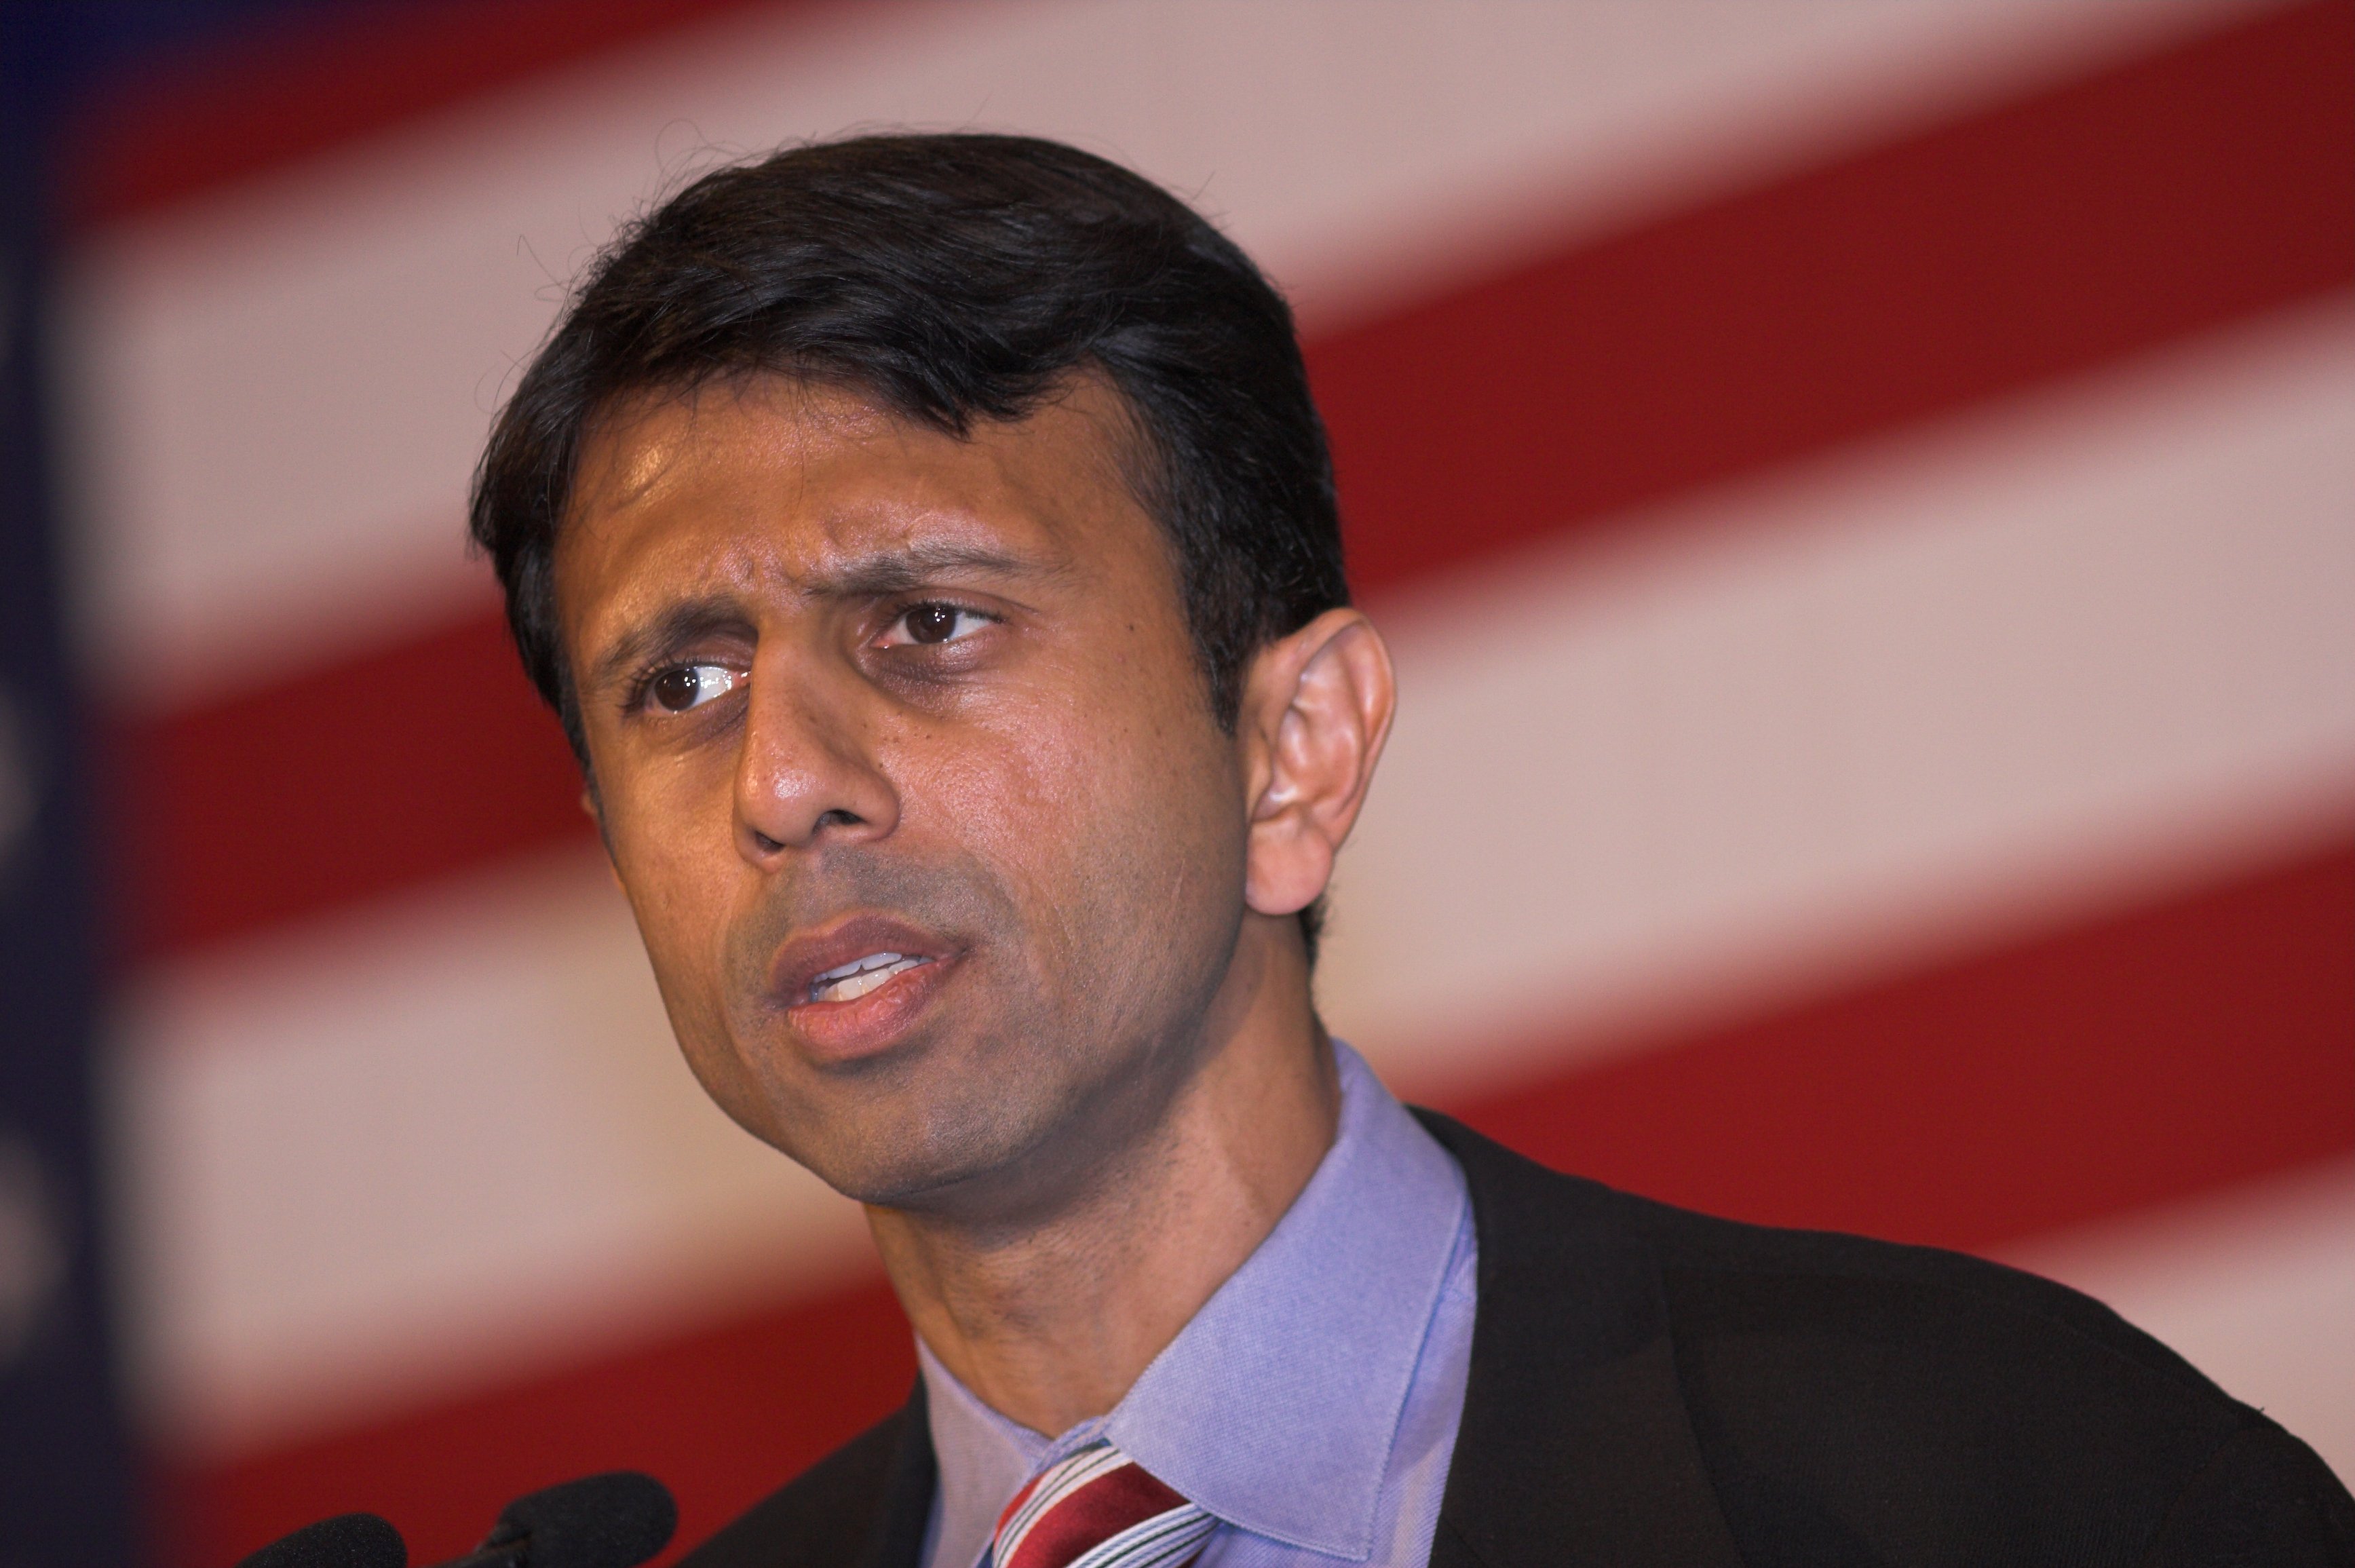 Bobby Jindal on Muslim Americans ‘That’s Not Immigration,’ It’s